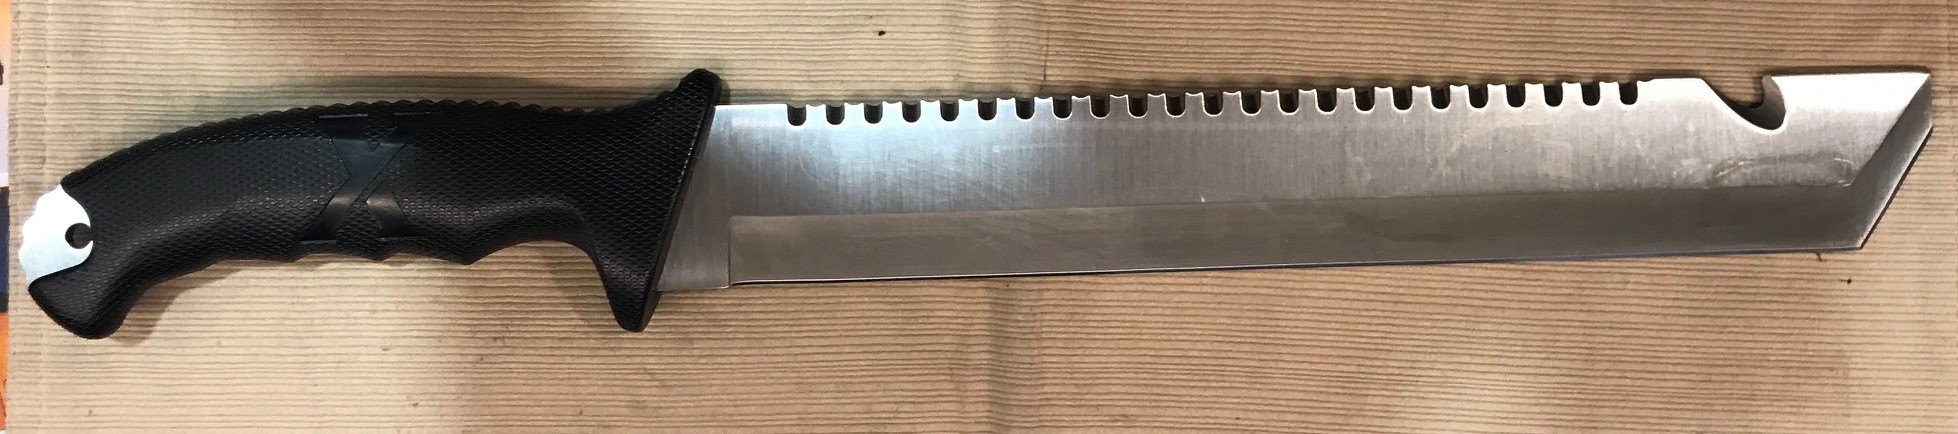 This machete was discovered in a carry-on bag at Houston (IAH). 